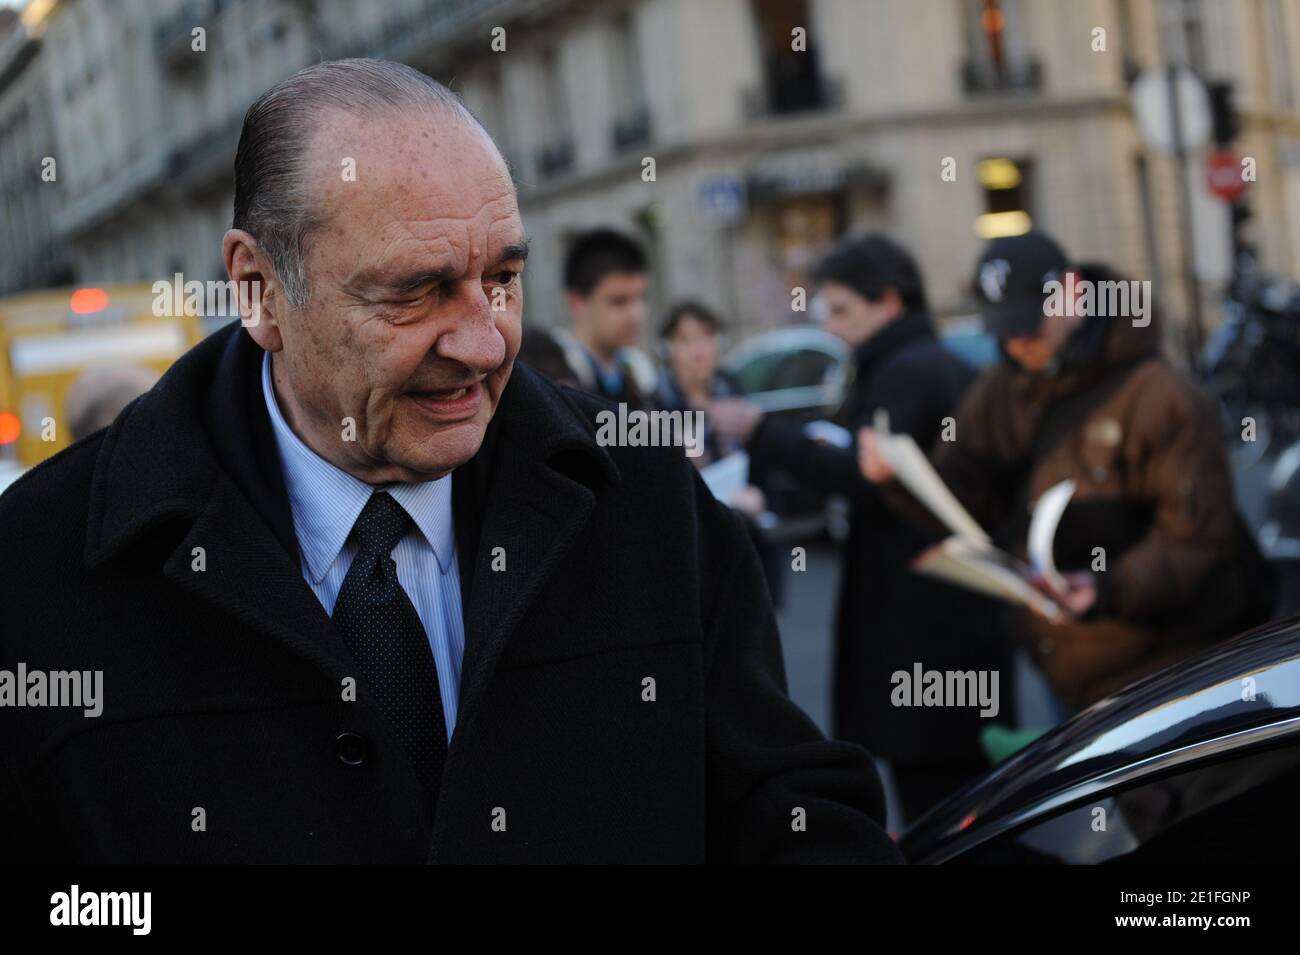 Former French President Jacques Chirac is pictured as he is leaving the L’Avenue restaurant in Paris, France on March 21, 2011. Photo by Mousse/ABACAPRESS.COM Stock Photo